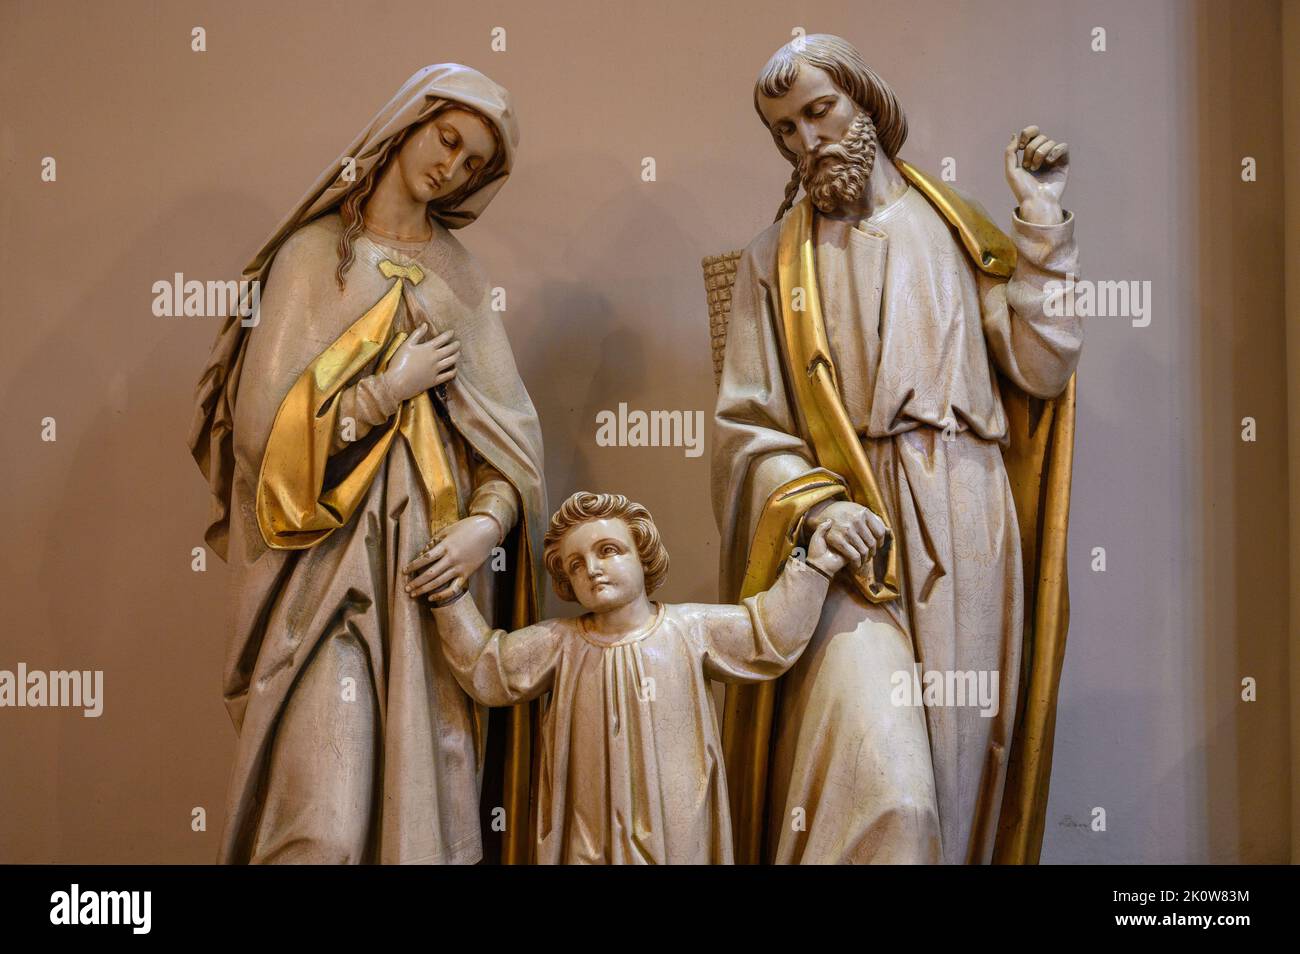 Sculpture of the Holy Family – Jesus, Mary and Joseph in the St Alphonse church in Luxembourg City, Luxembourg. Stock Photo